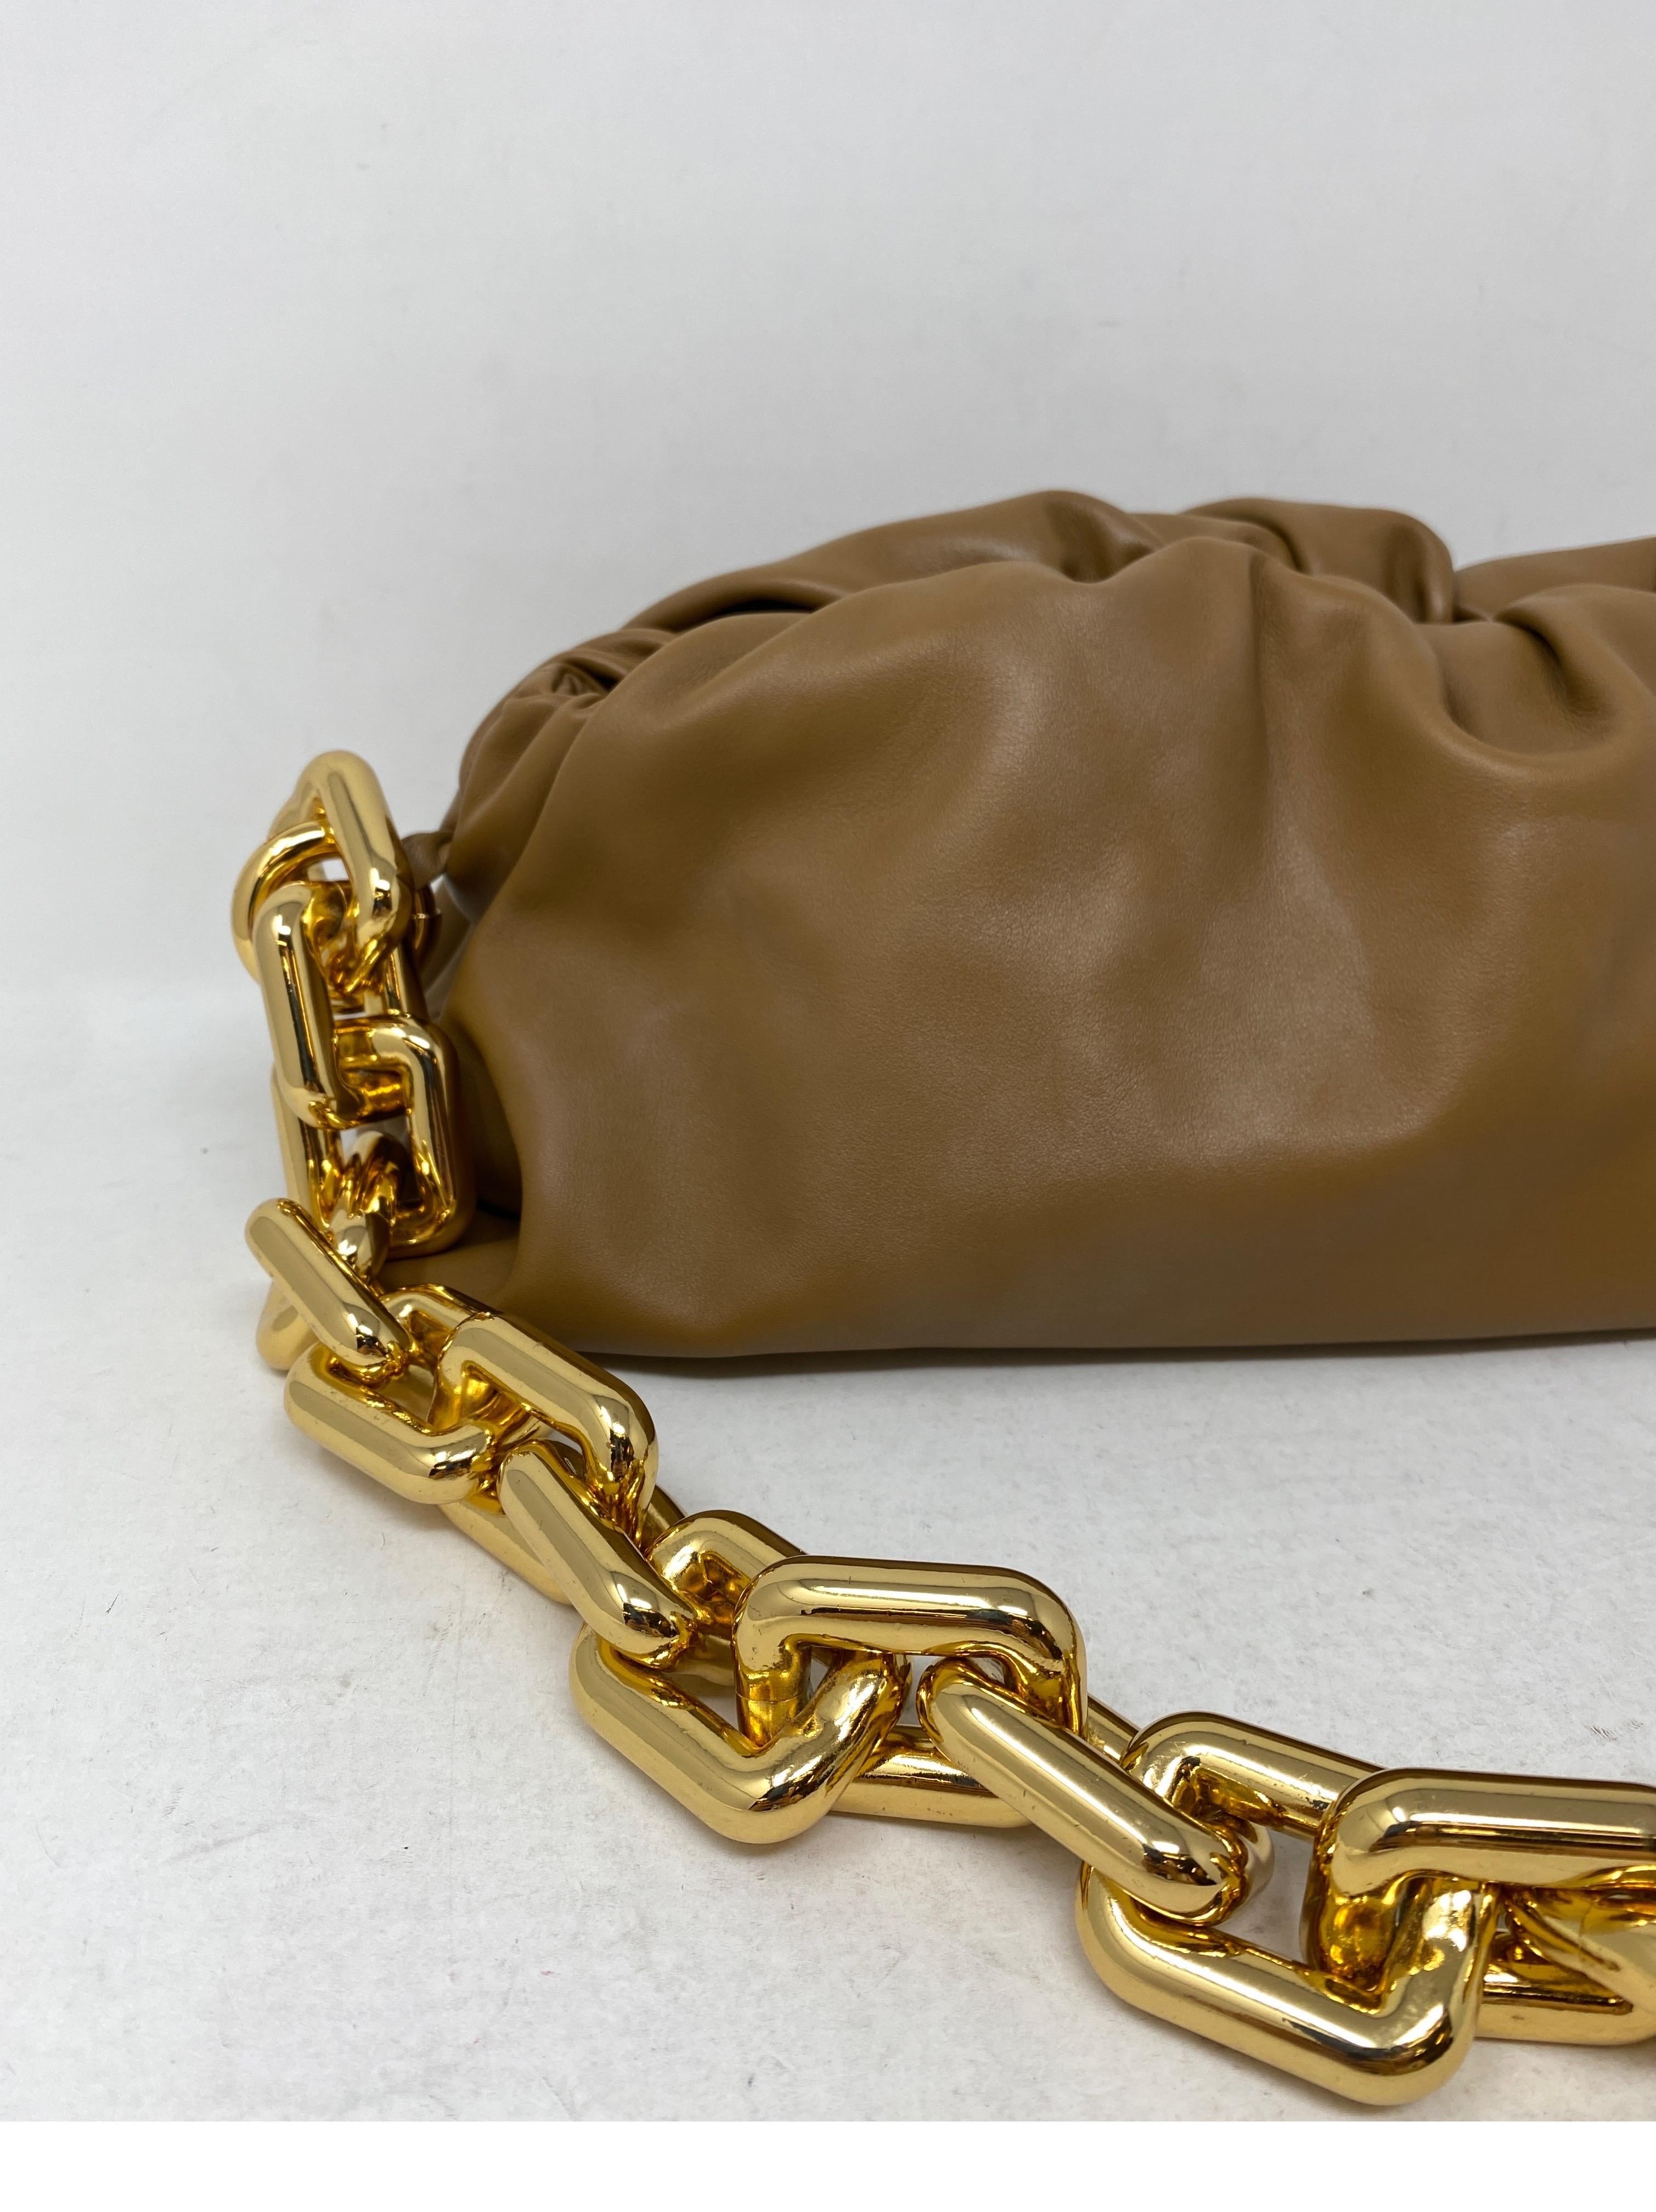 Bottega Veneta Leather Clutch Bag. Tan gold hardware Bottega. Iconic bag. Chunky gold hardware. Nice nuetral color. Leather is known for its quality from Bottega Veneta. The house has become more popular than ever. Can be detached from bag. Mint